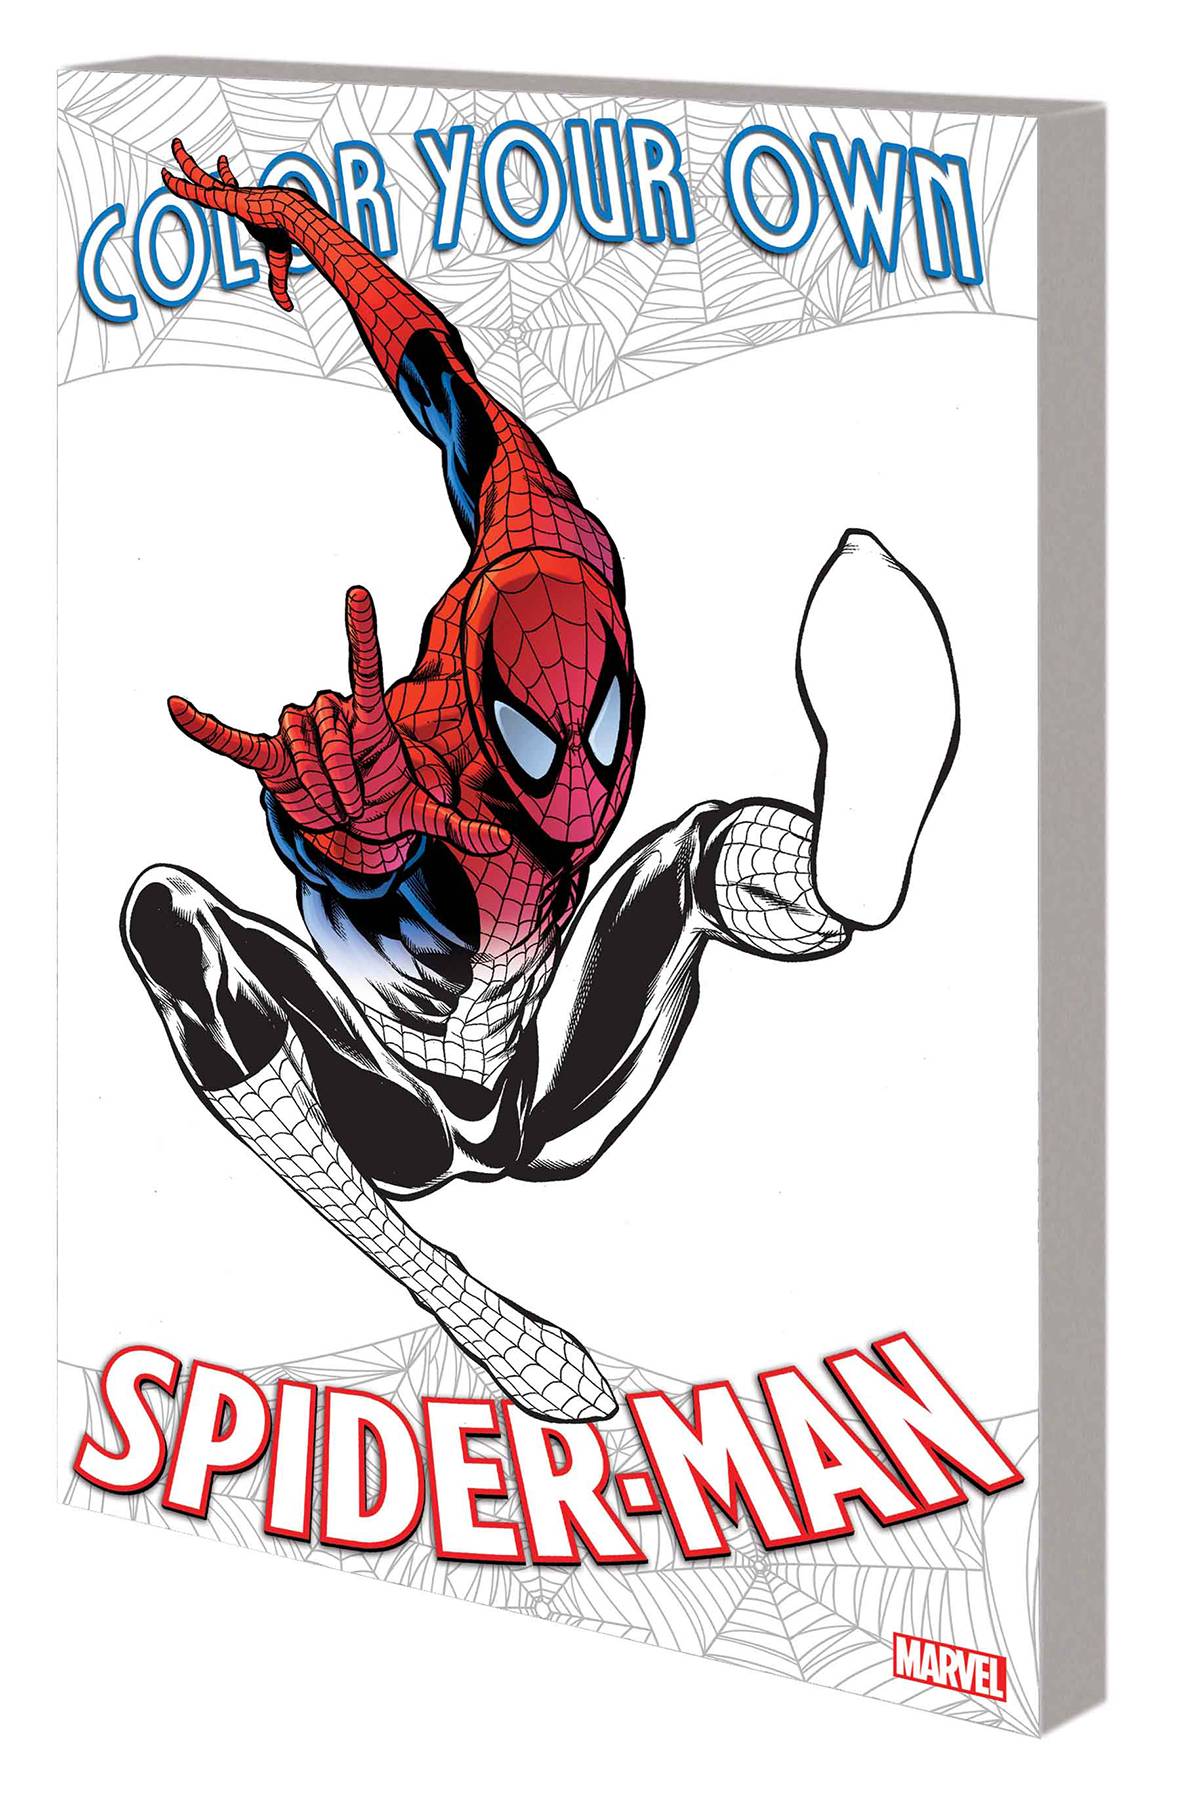 Color Your Own Spider-Man Graphic Novel